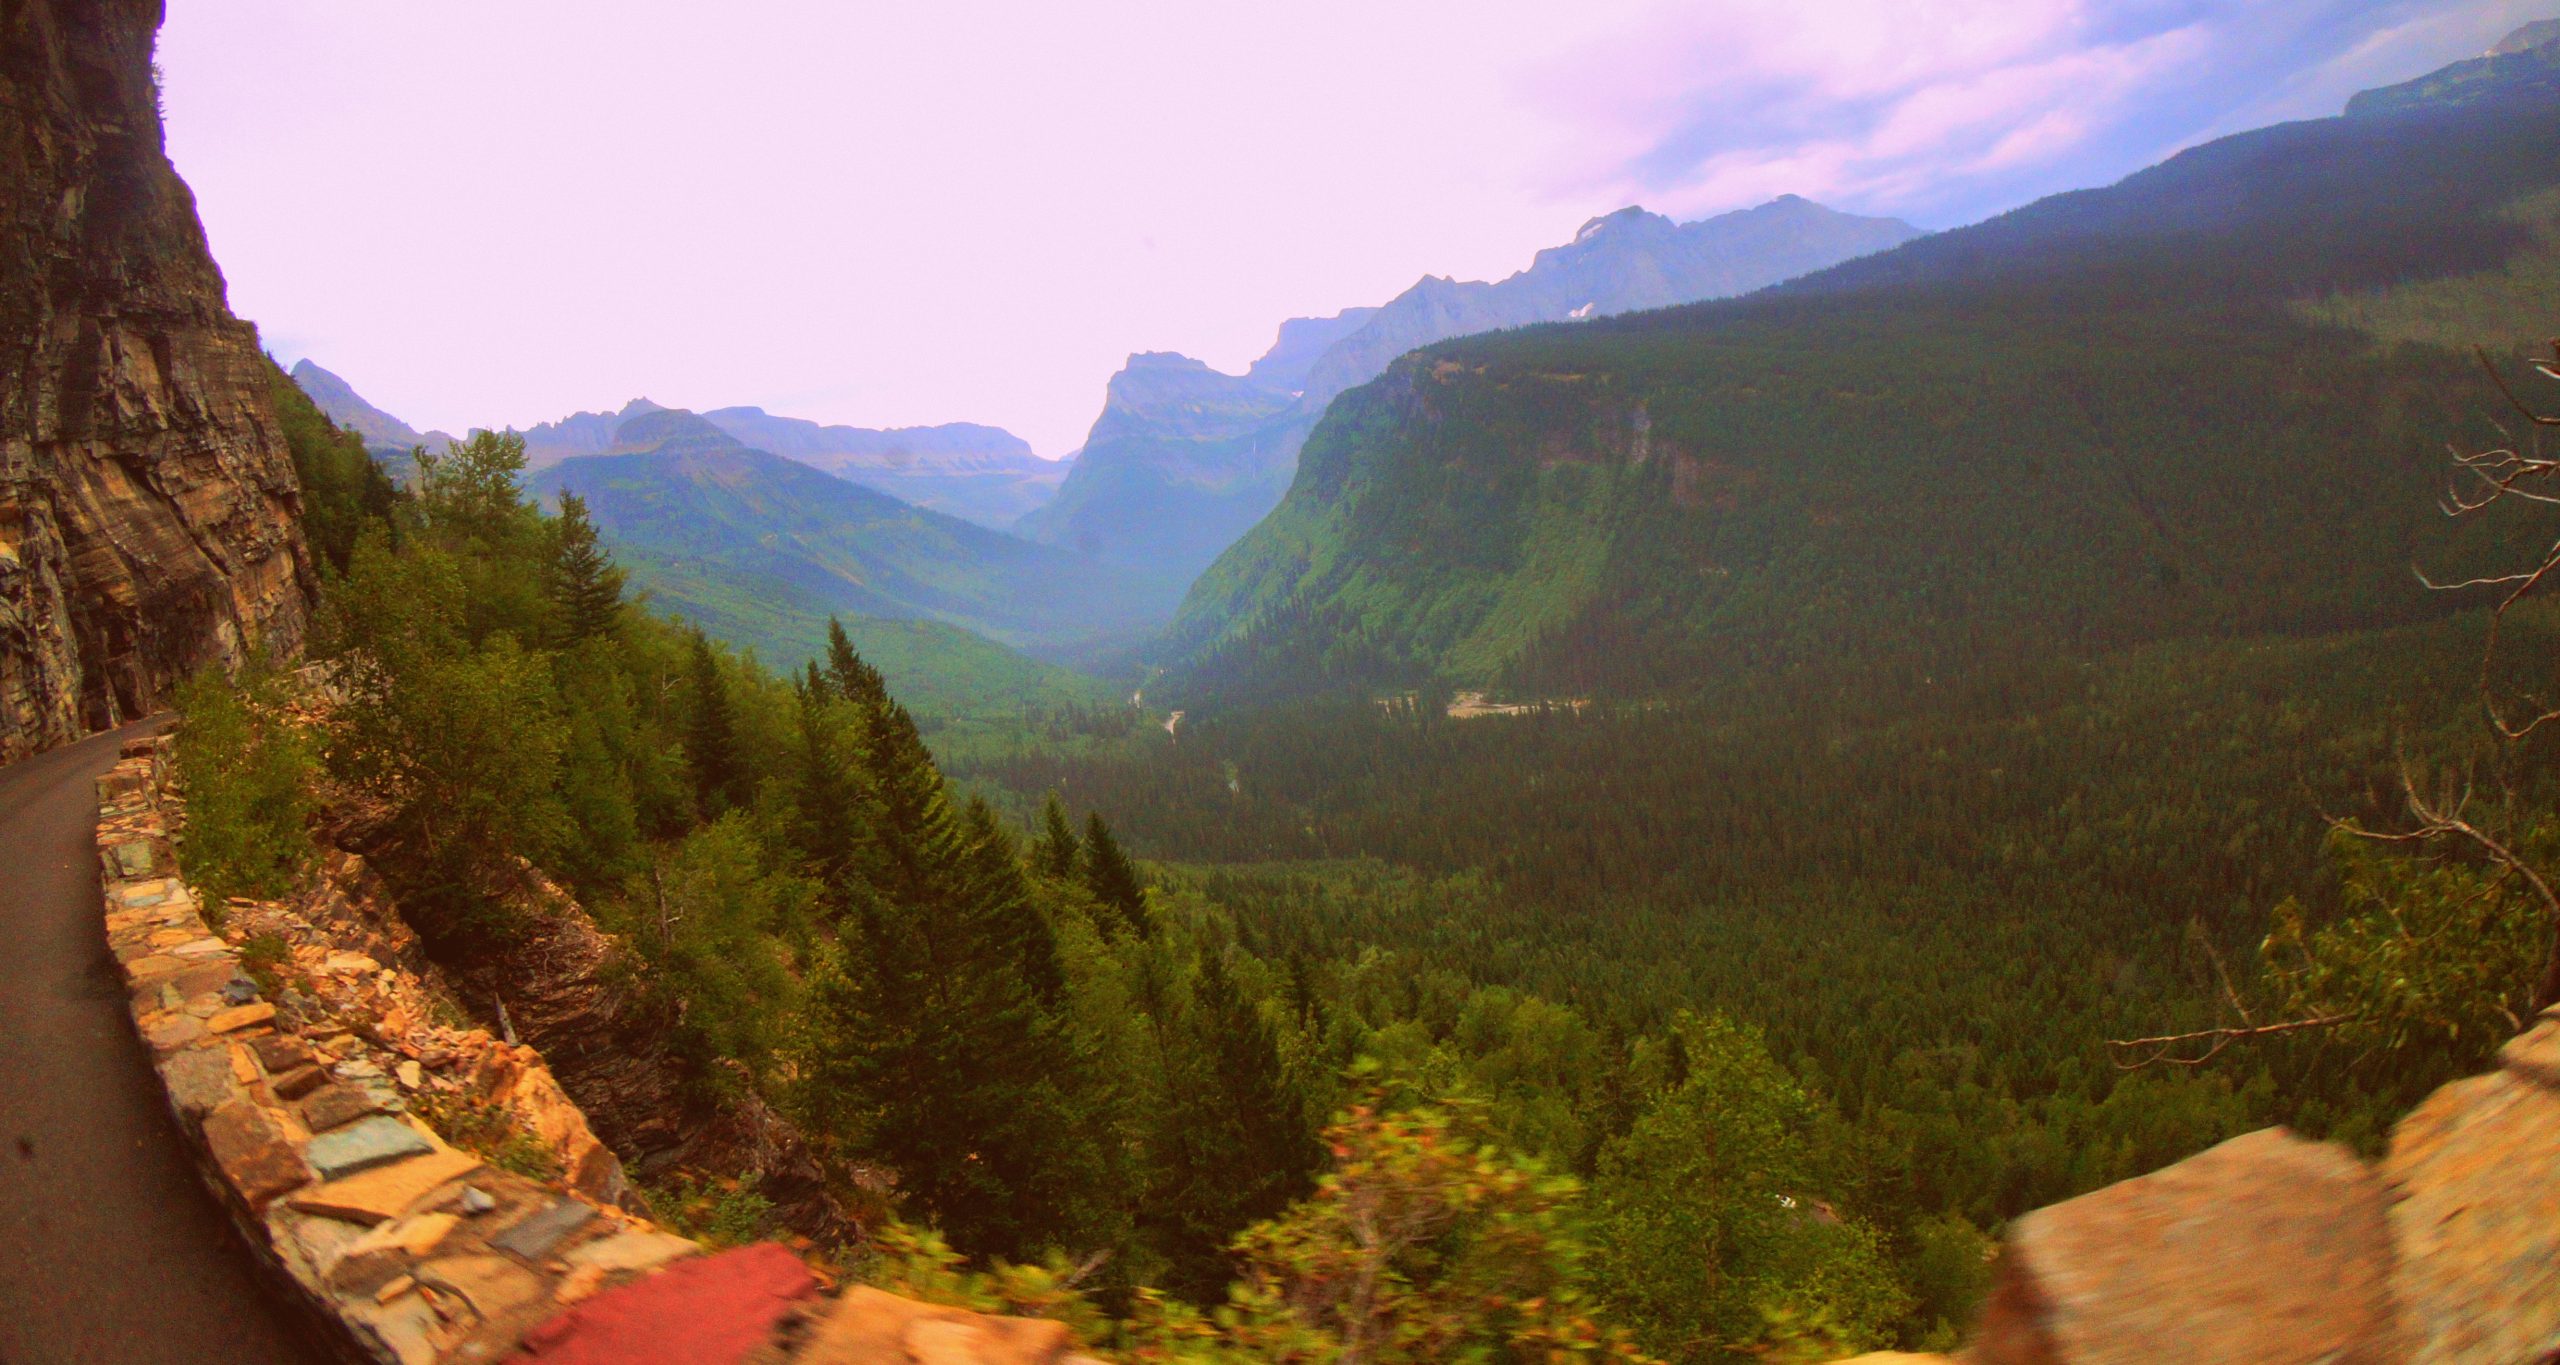 Driving the Going-To-The-Sun Road in Montana